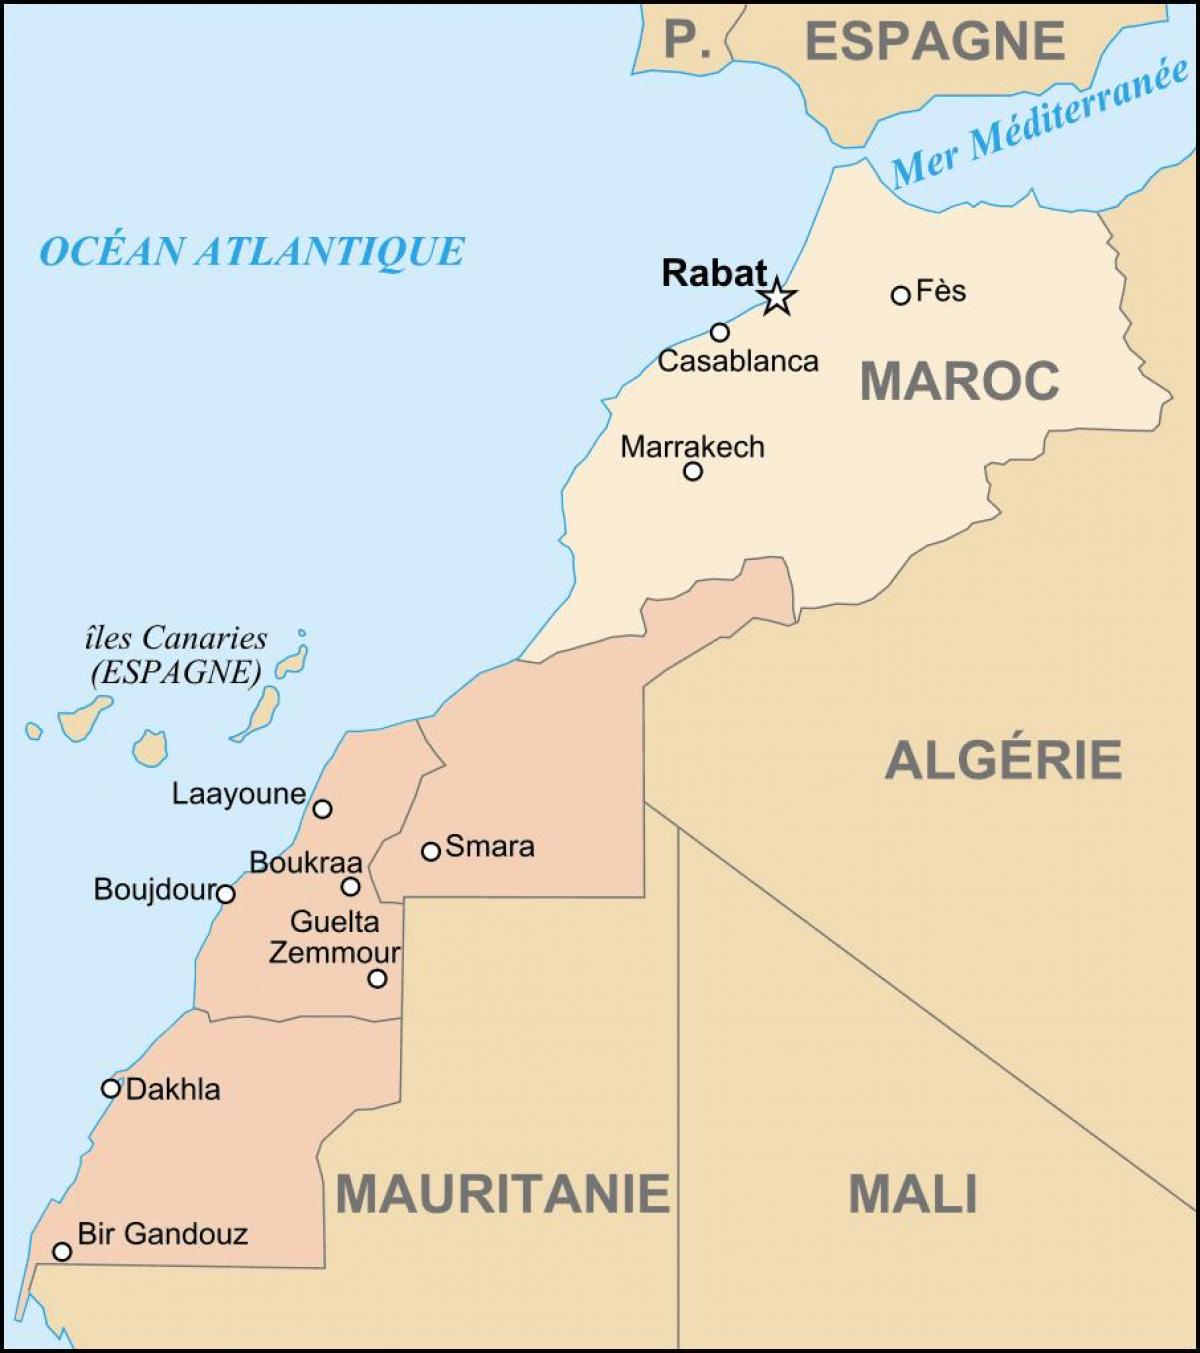 Map of Morocco and bordering countries